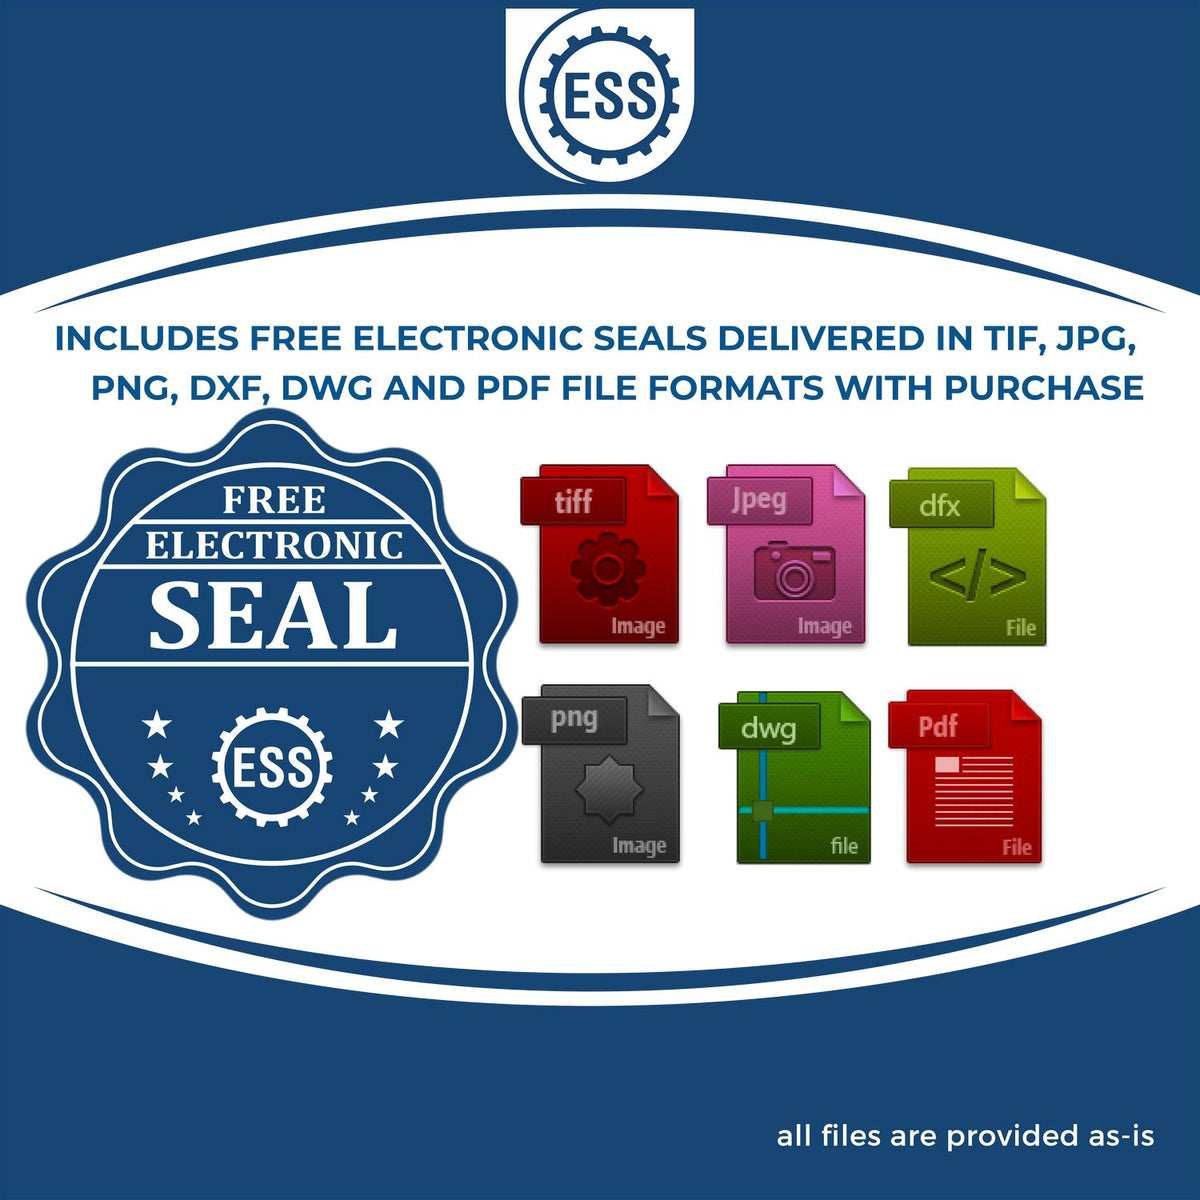 An infographic for the free electronic seal for the Heavy Duty Cast Iron Kentucky Geologist Seal Embosser illustrating the different file type icons such as DXF, DWG, TIF, JPG and PNG.